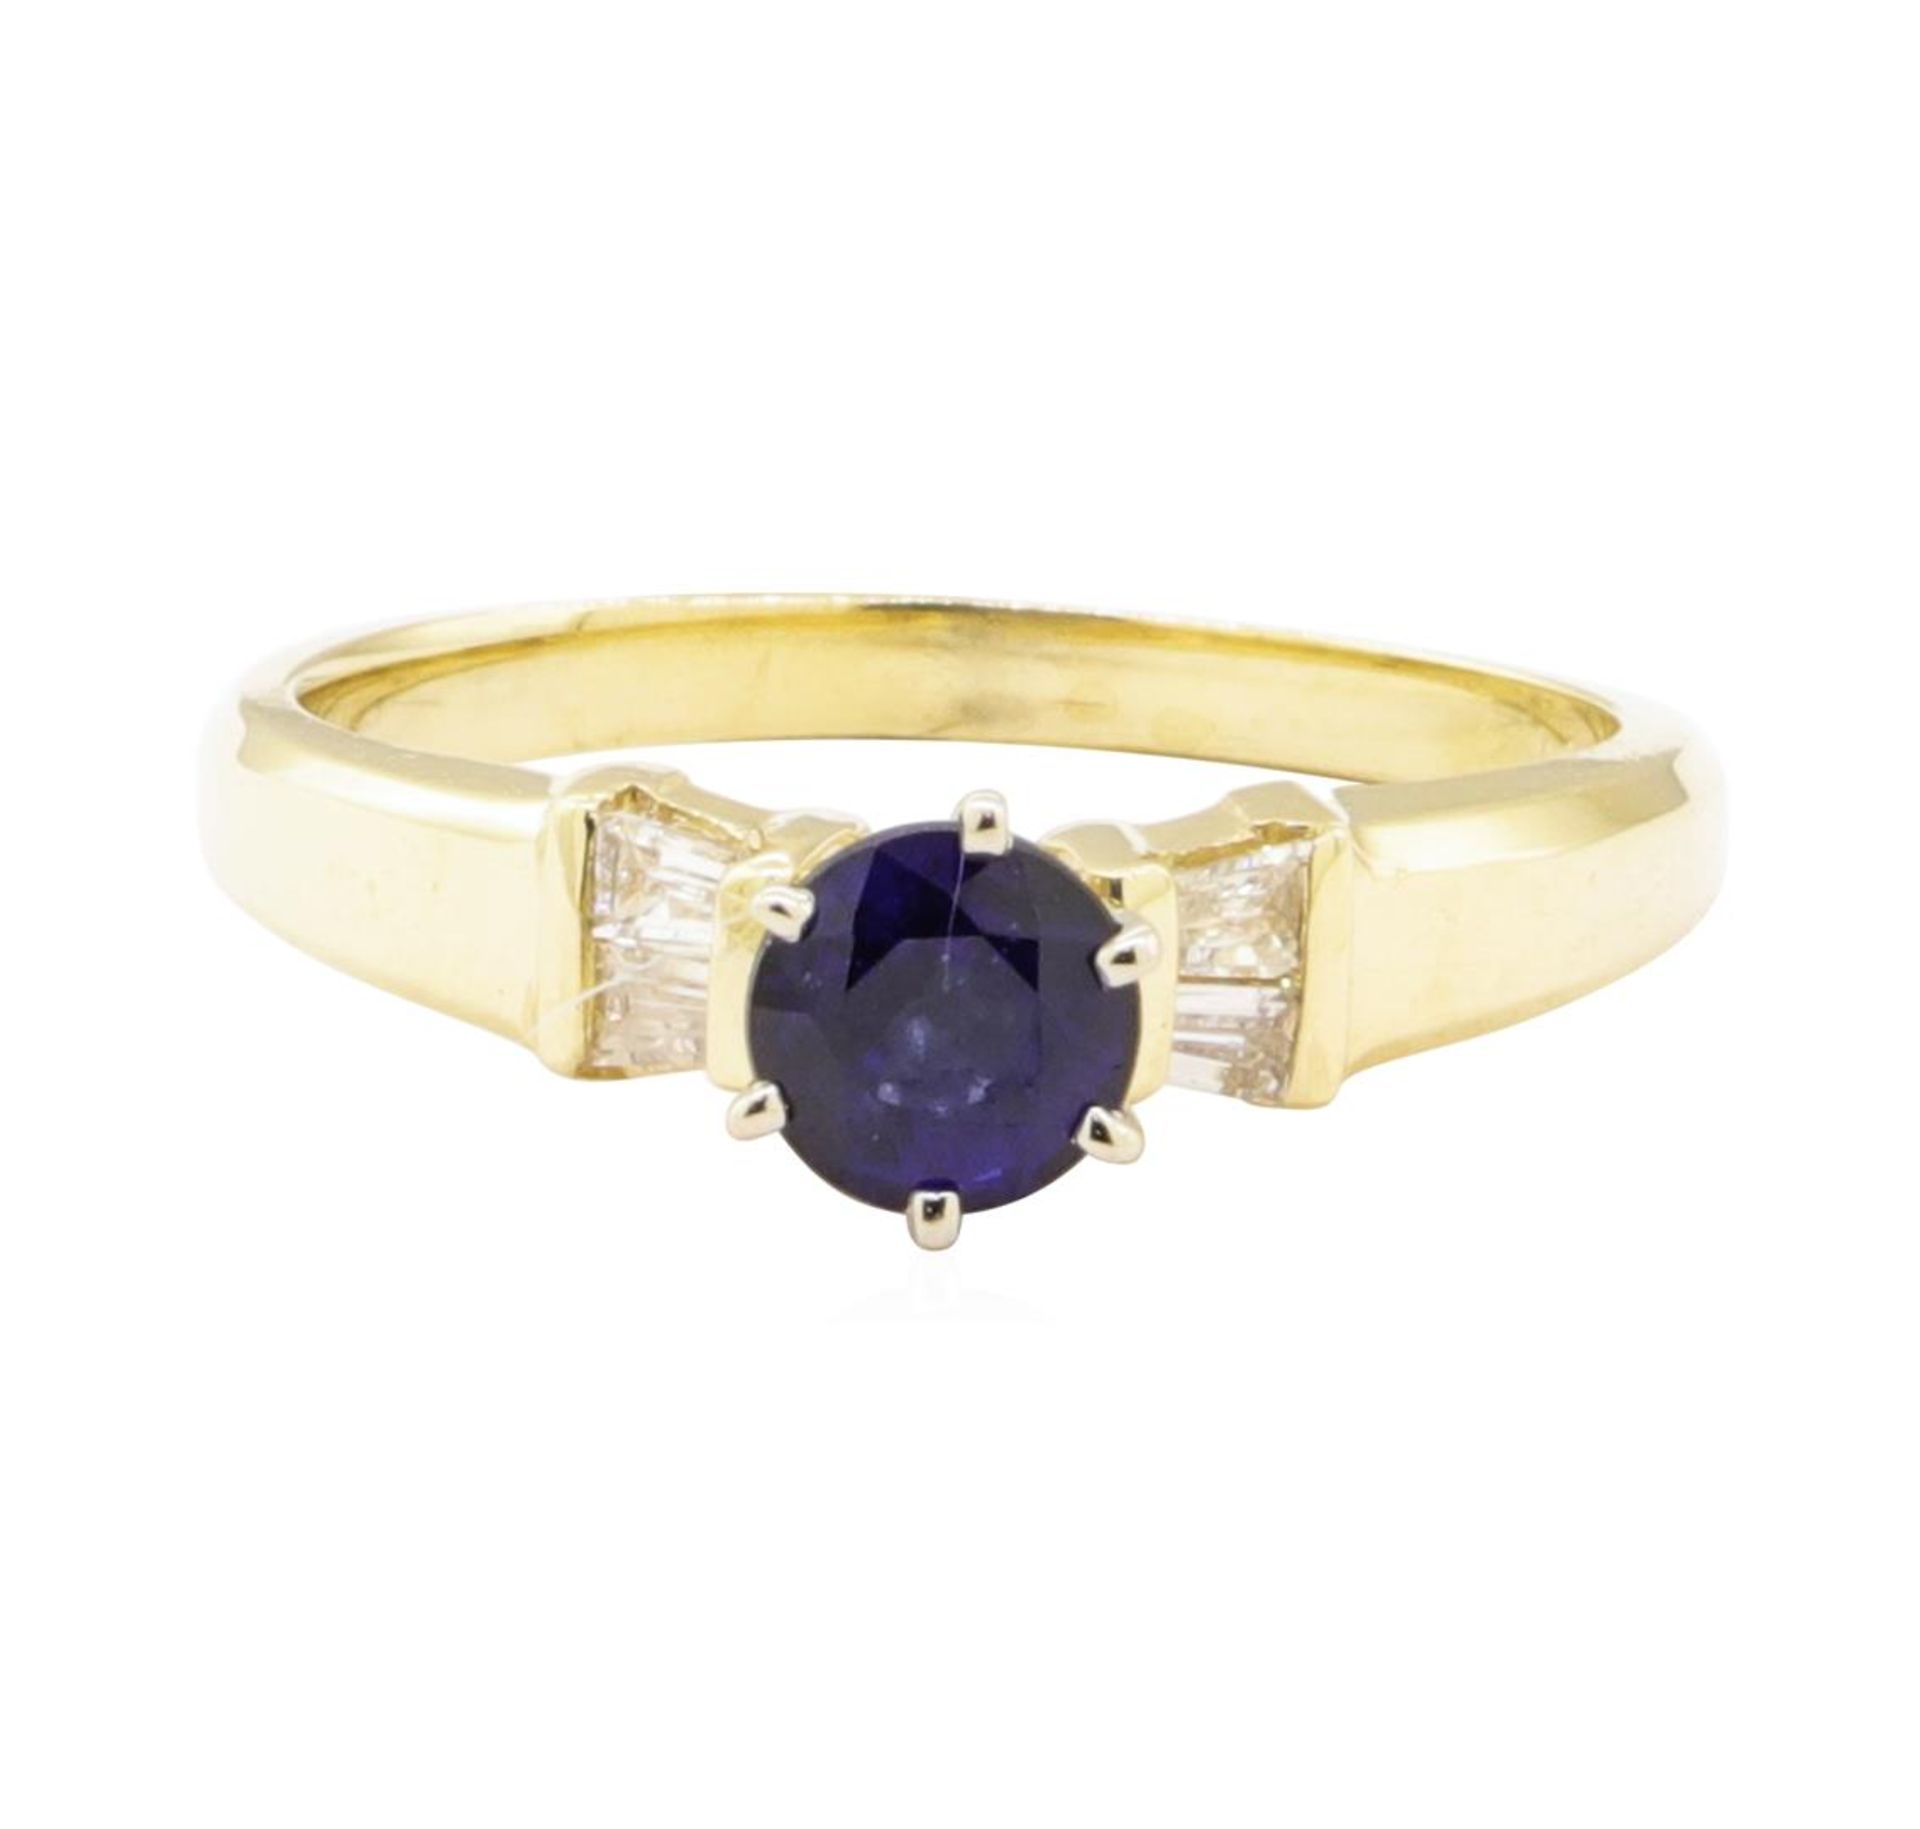 0.98ctw Blue Sapphire and Diamond Ring - 14KT Yellow Gold - Image 2 of 4